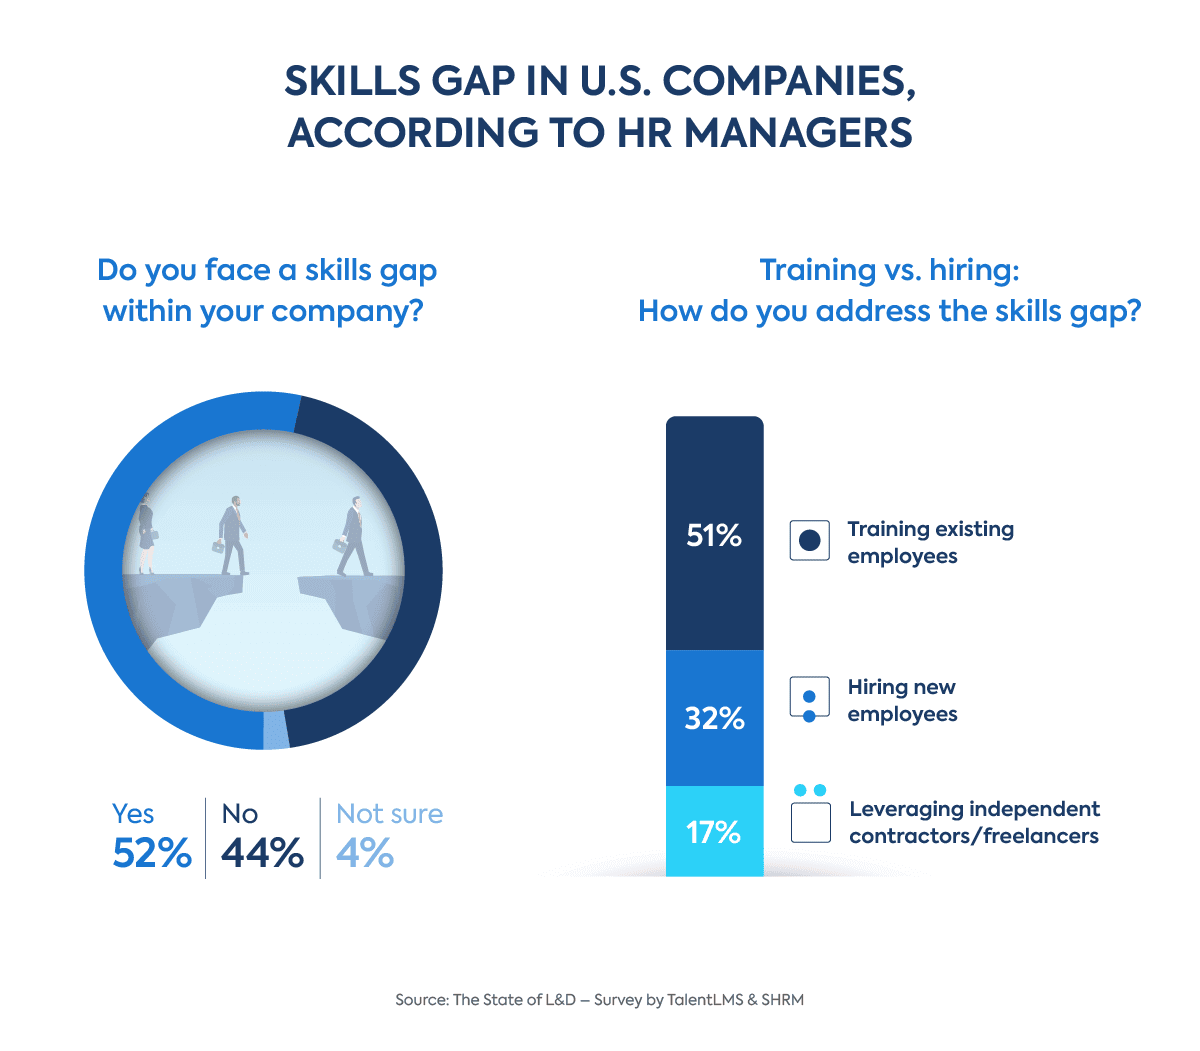 Companies are using part of their L&D budget to train their people and cover current skills gaps